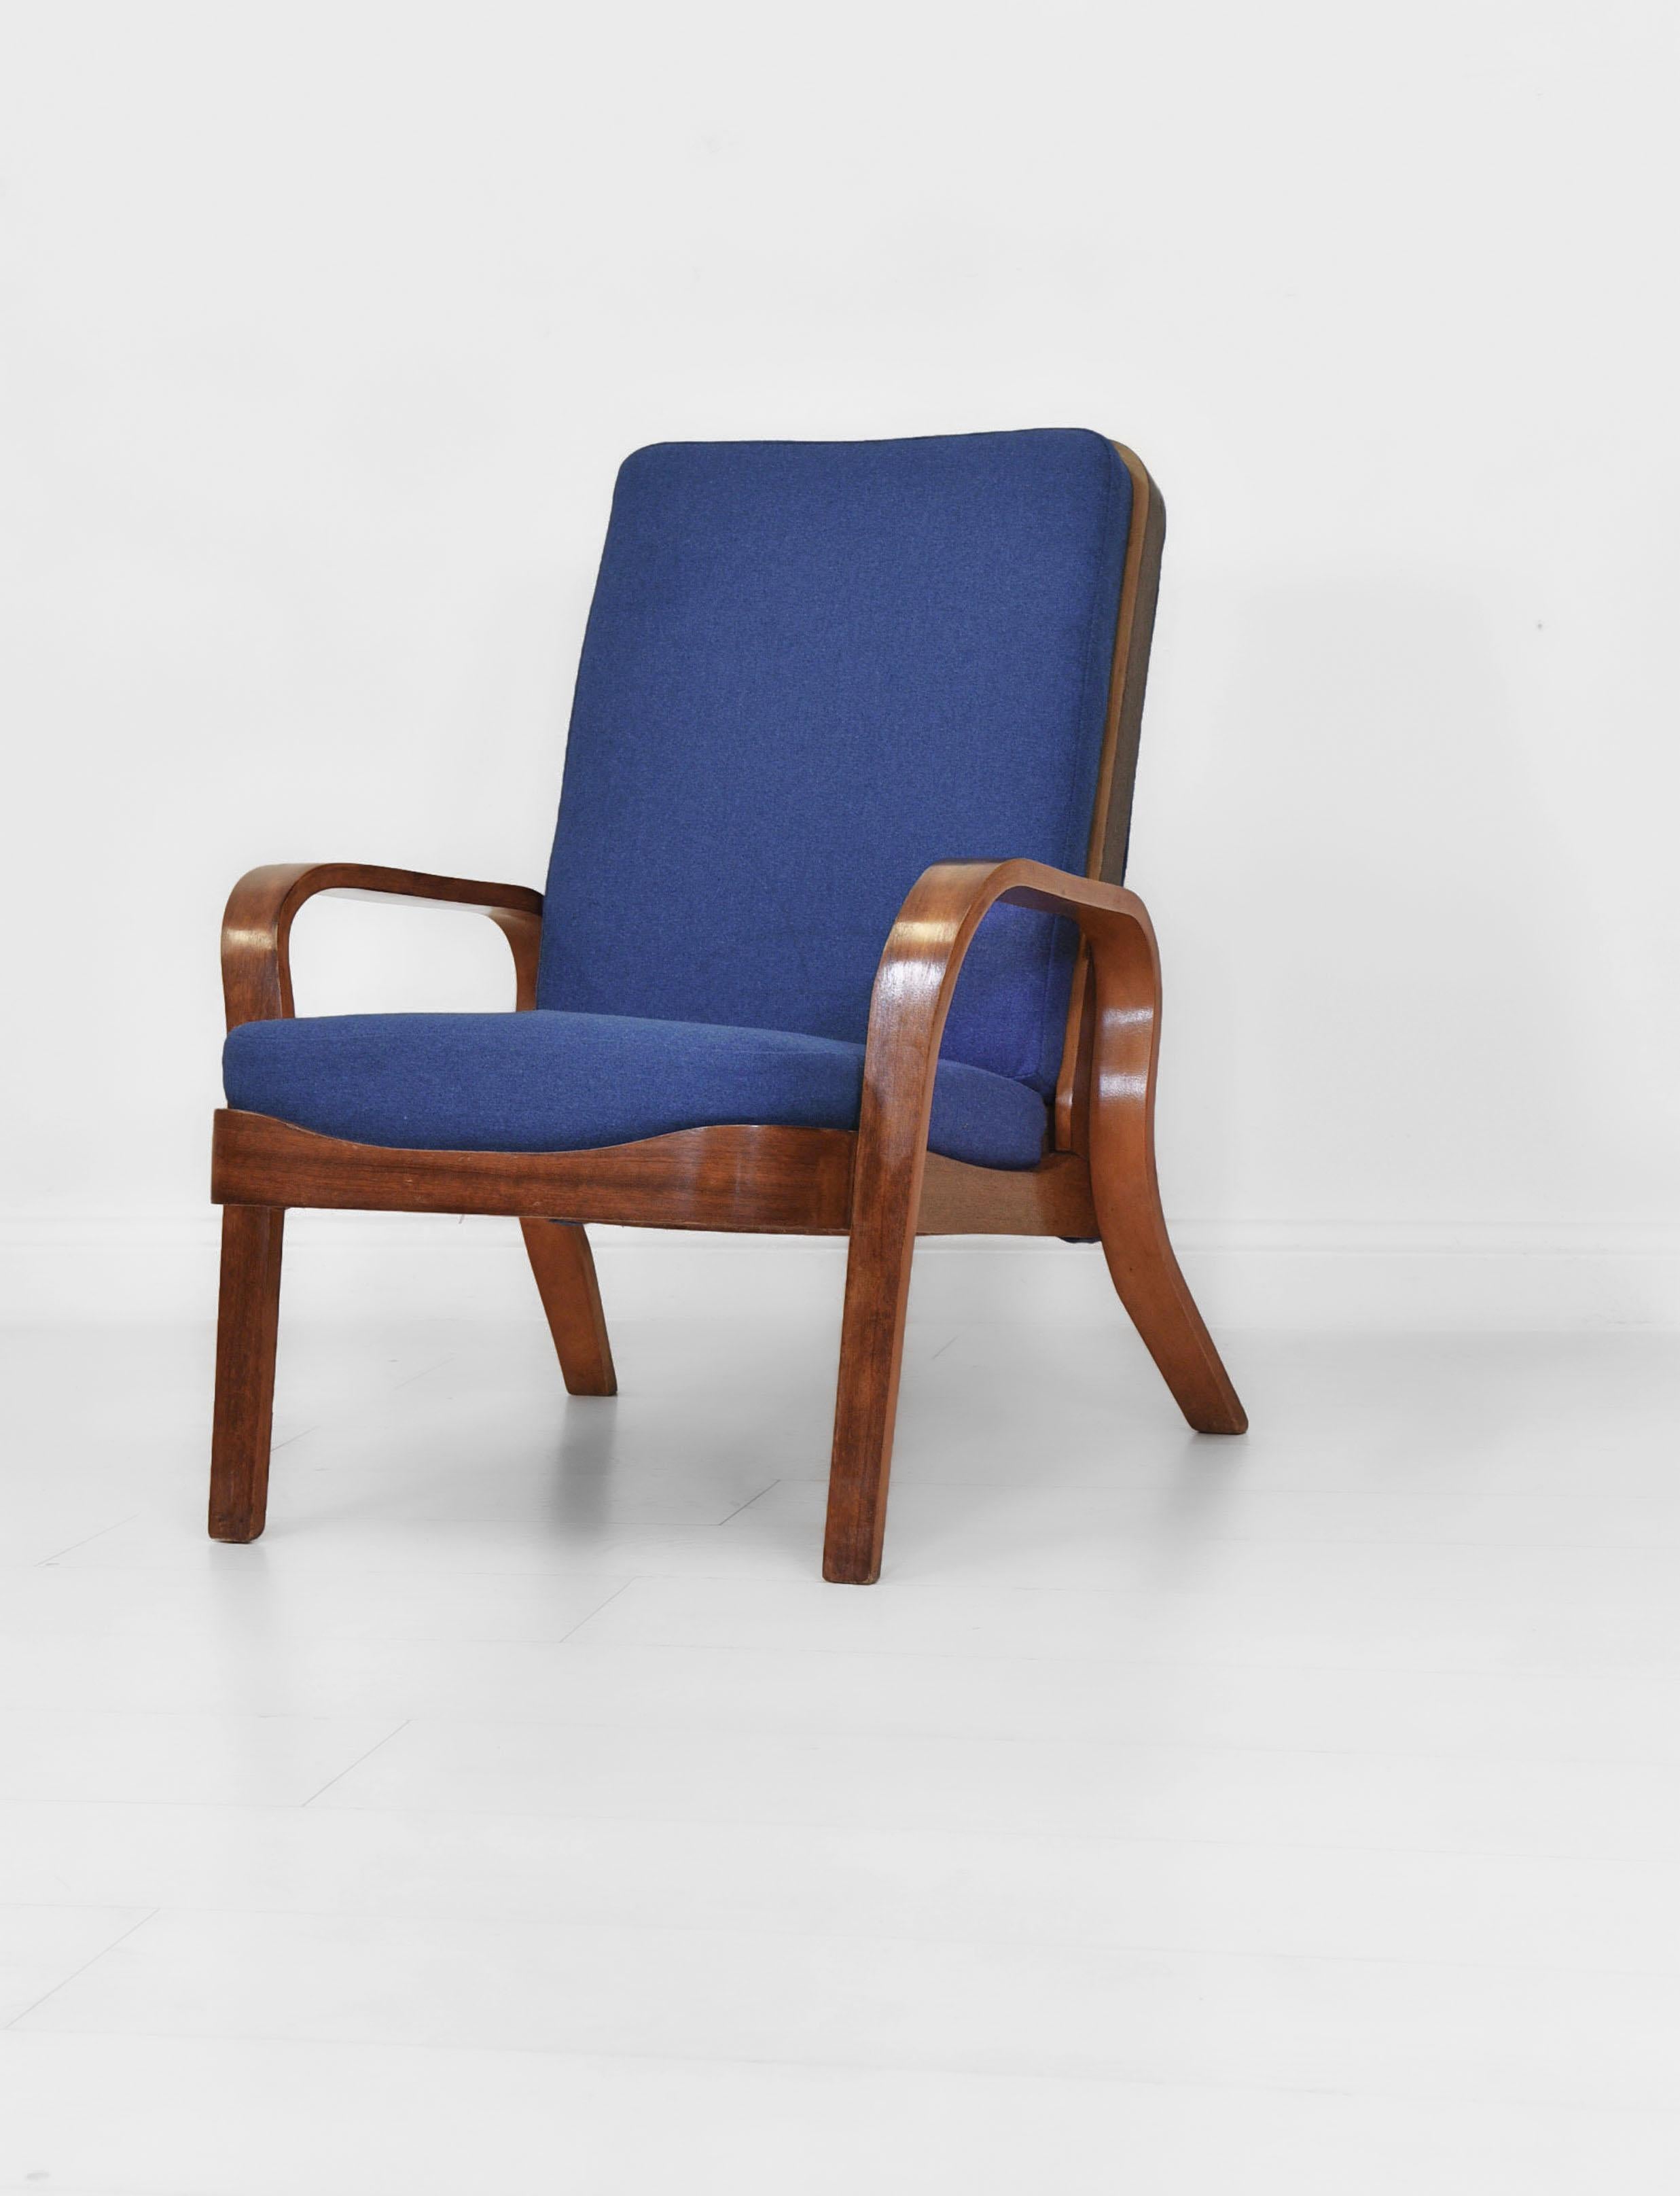 Modernist bent-ply armchair by British designer and architect Eric Lyons (1912–1980). circa late 1940s.

Made by Packet Furniture, the armchair has recently been re-covered in a textured royal blue fabric with new medium to soft foam cushions. The